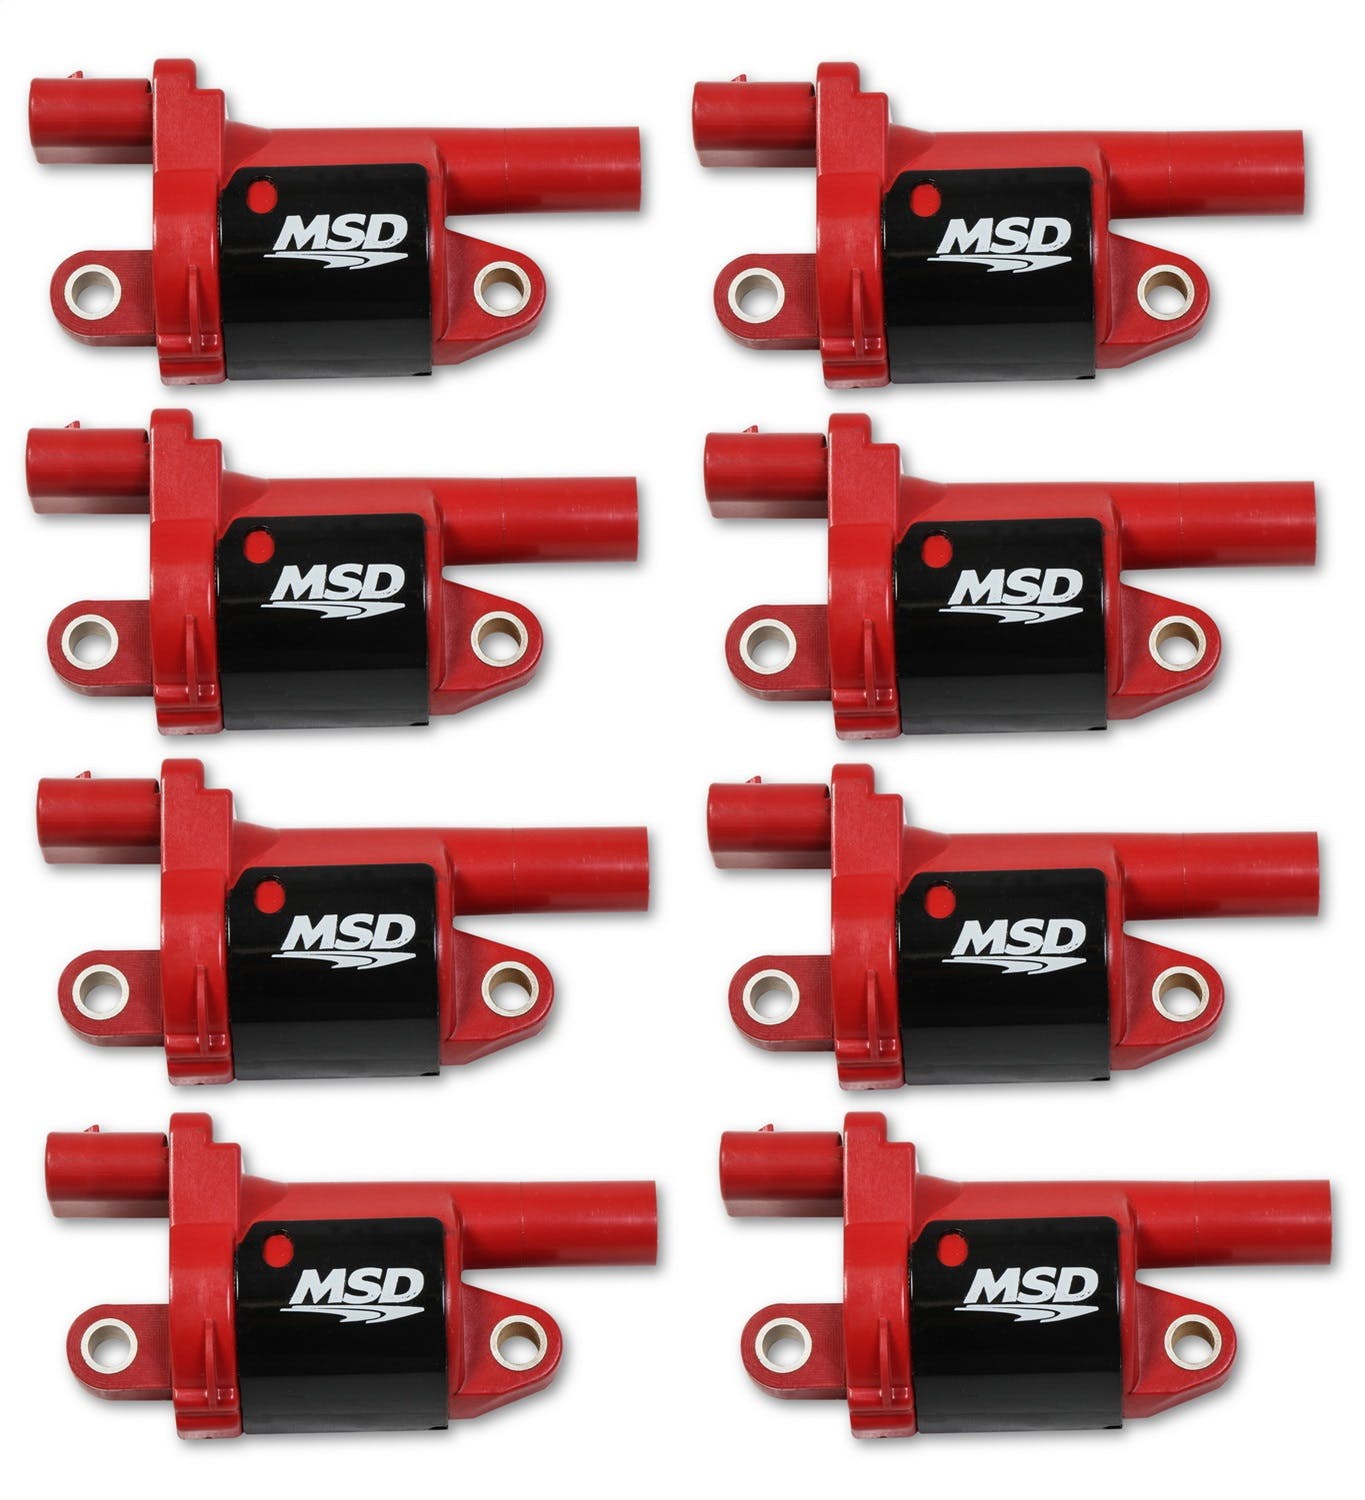 MSD Performance 82688 Coils, Red, Round, 2014 and up GM V8, 8-pk